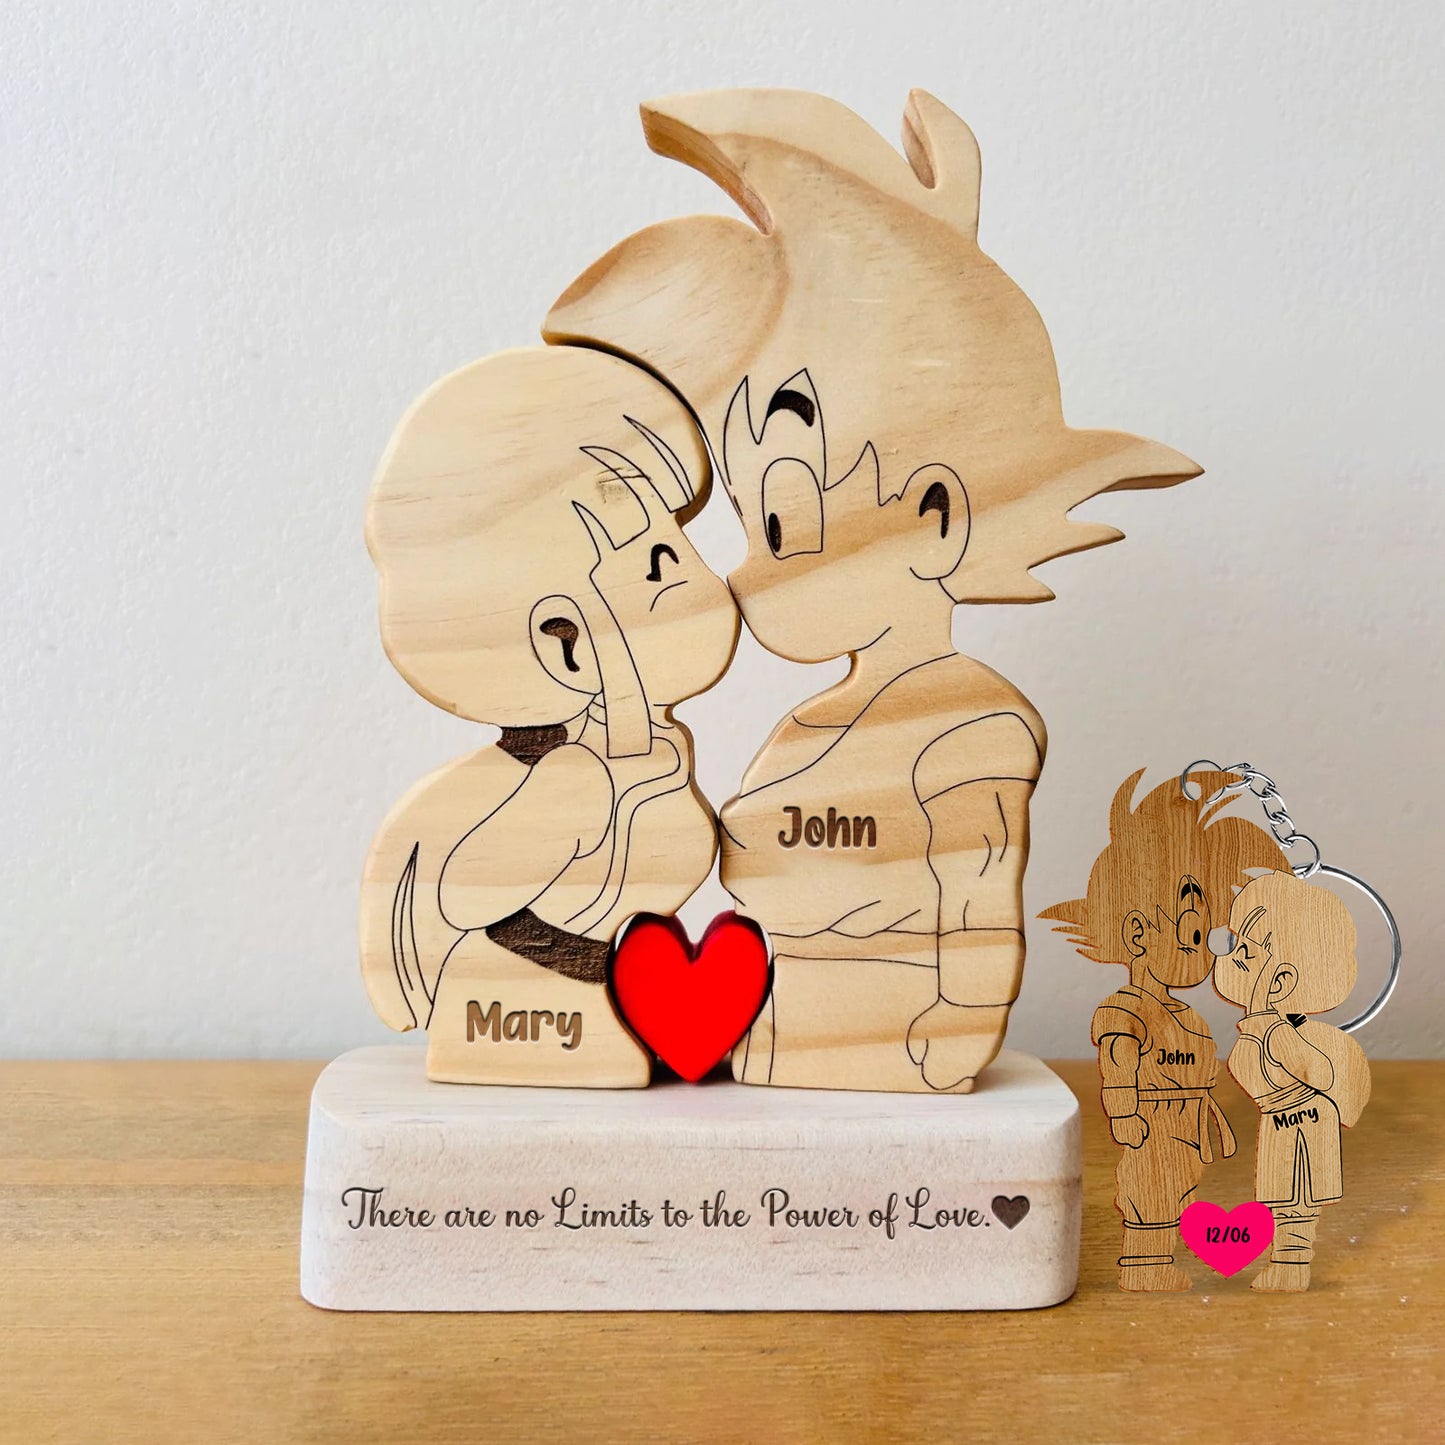 Couple - Cute Cartoon Character DBZ - Personalized Puzzle & Keychain